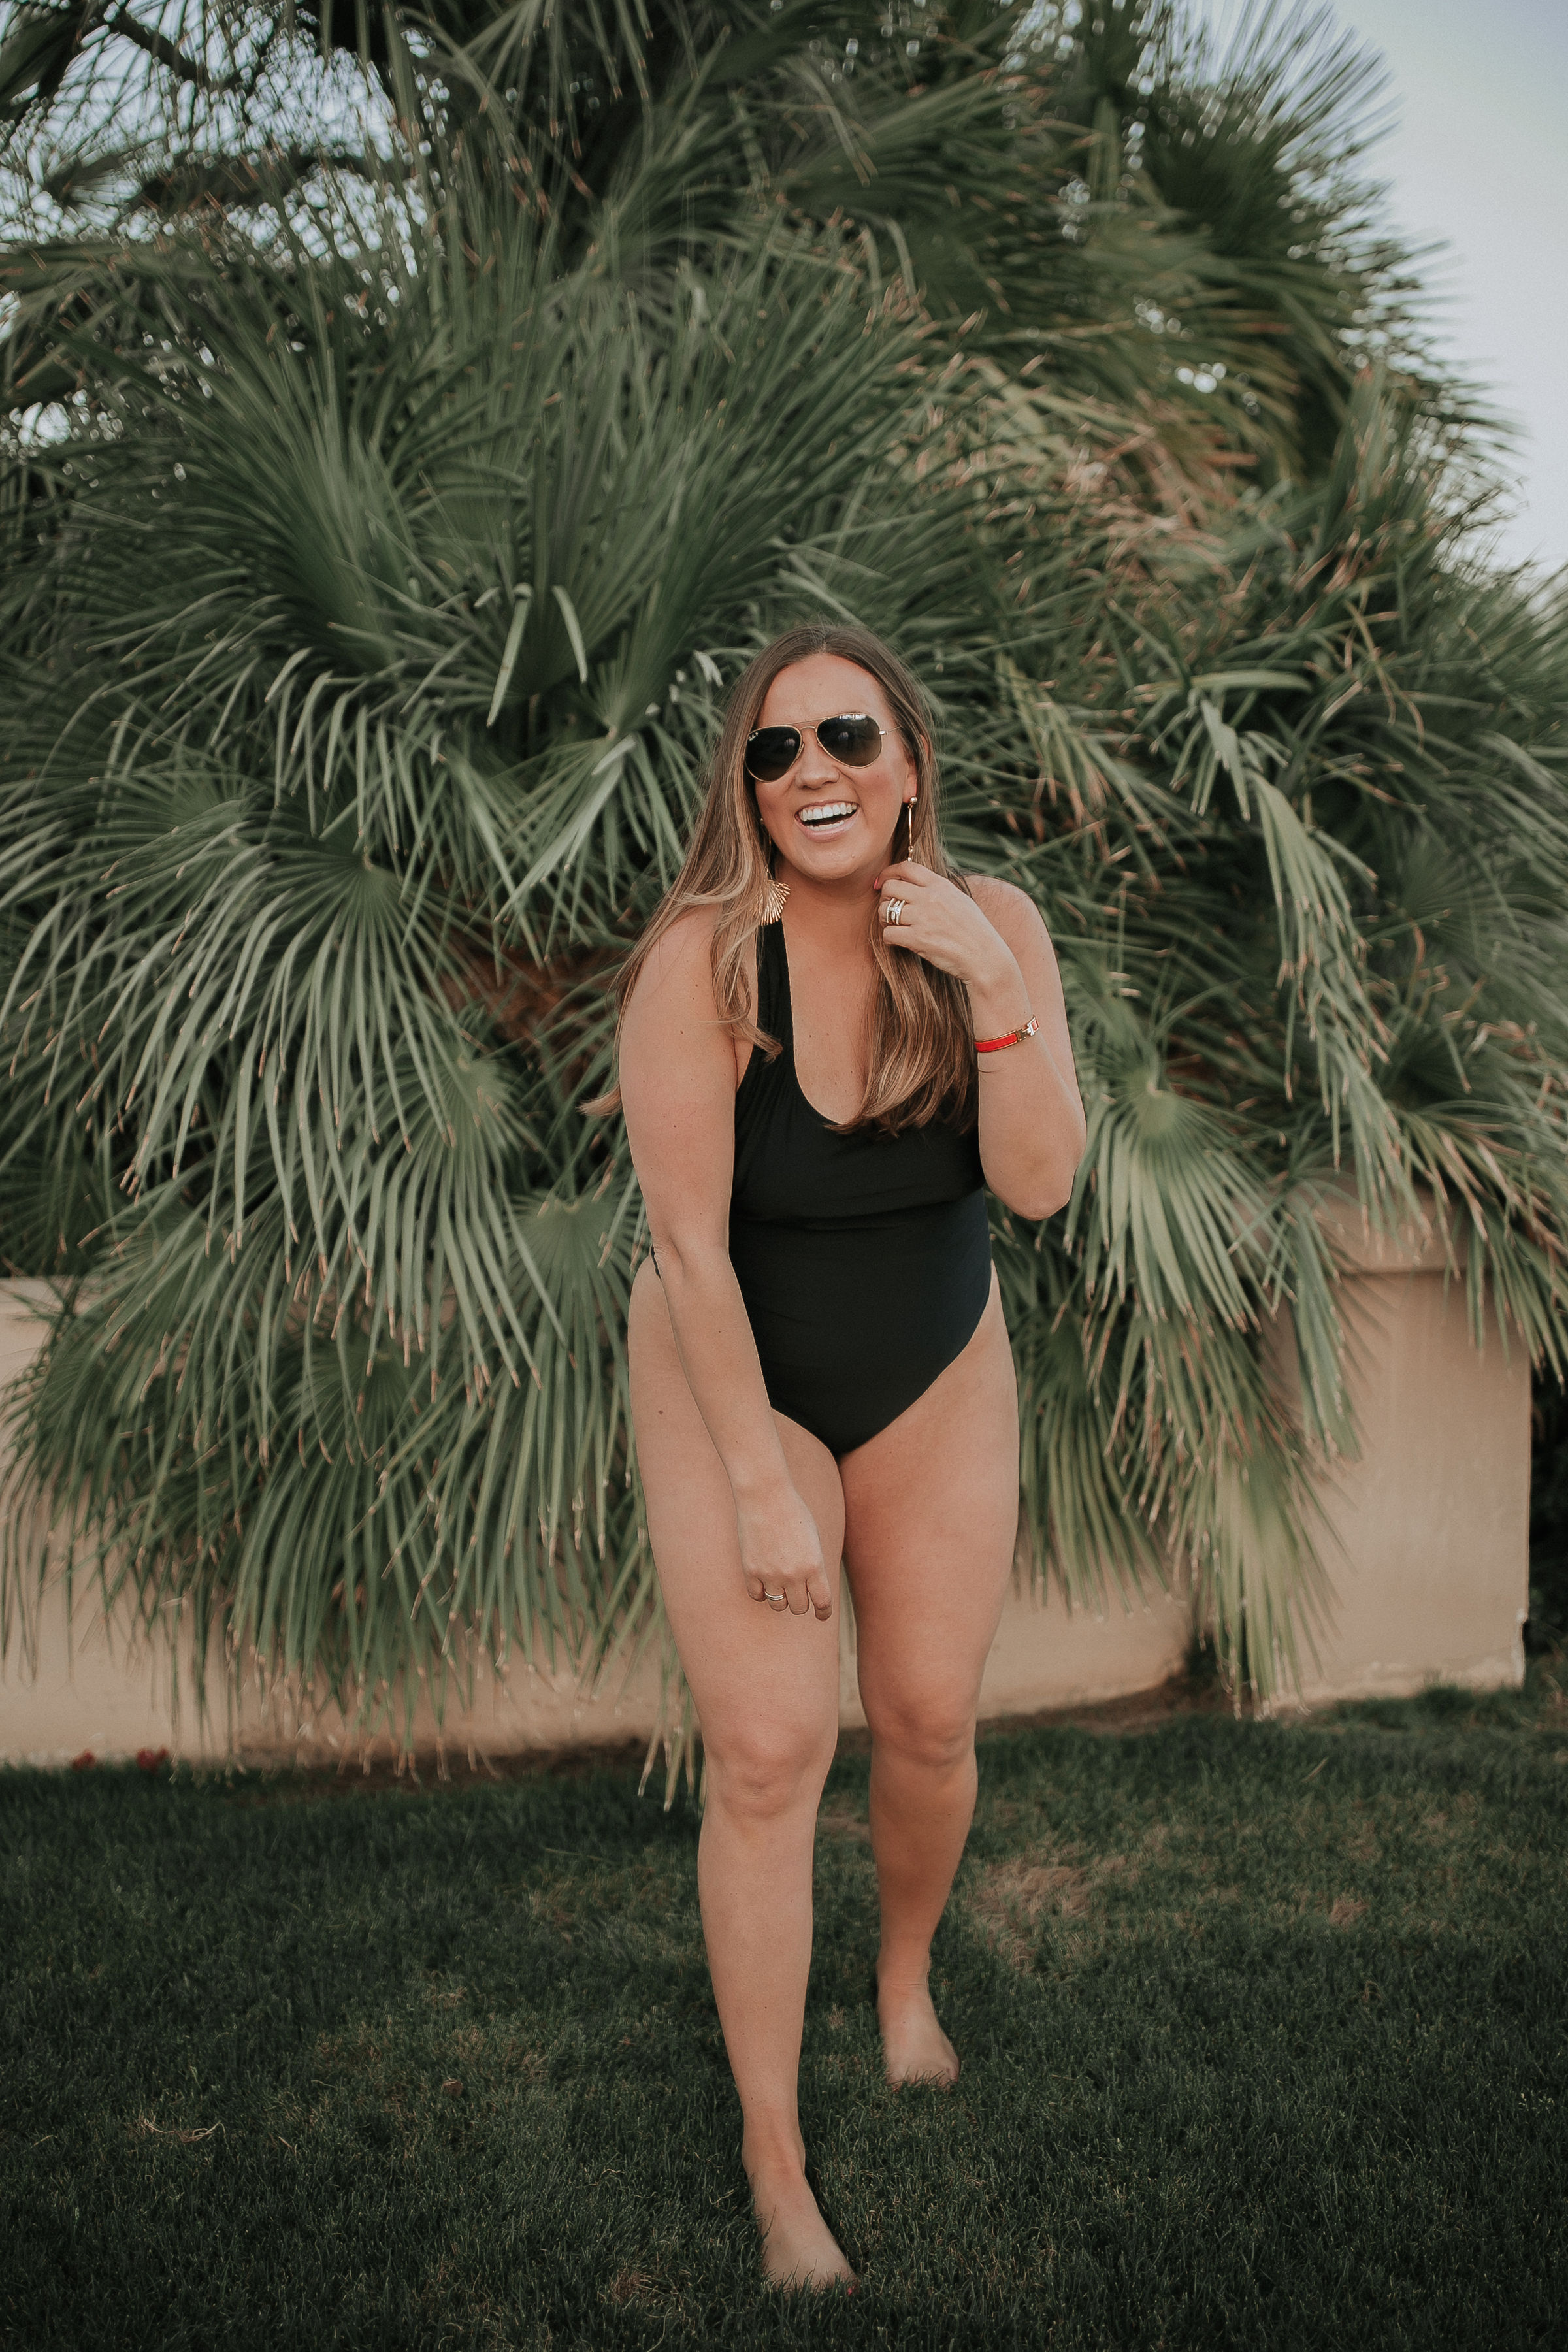 San Francisco blogger Ashley Zeal from Two Peas in a Prada shares affordable swimsuits for all body types. She is sharing the most flattering styles at a great price!